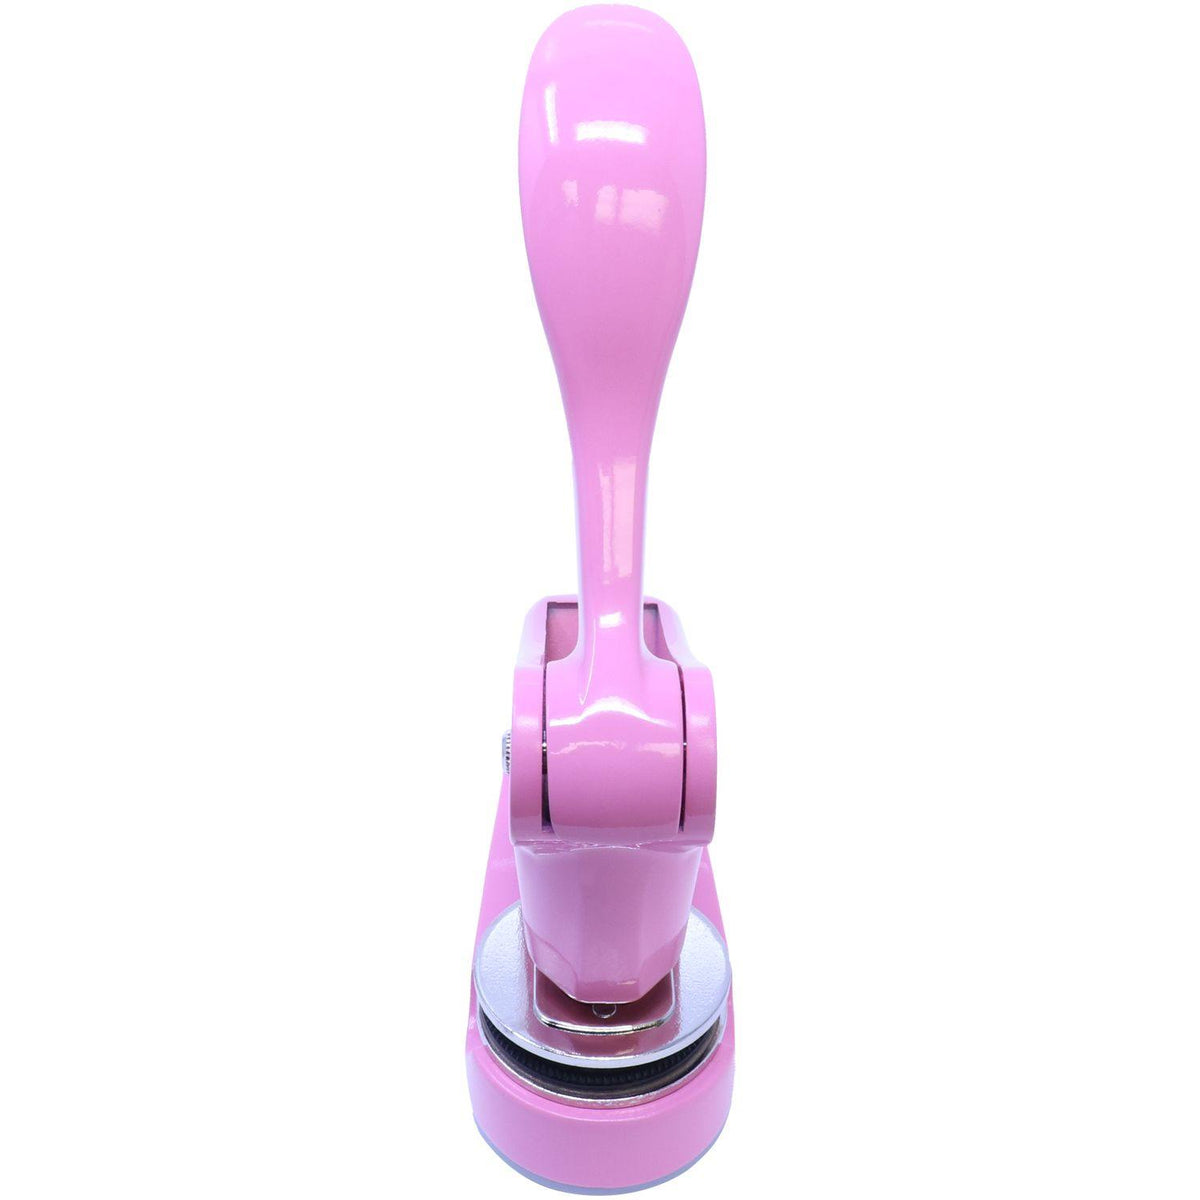 Public Weighmaster Pink Gift Embosser - Engineer Seal Stamps - Embosser Type_Desk, Embosser Type_Gift, Type of Use_Professional